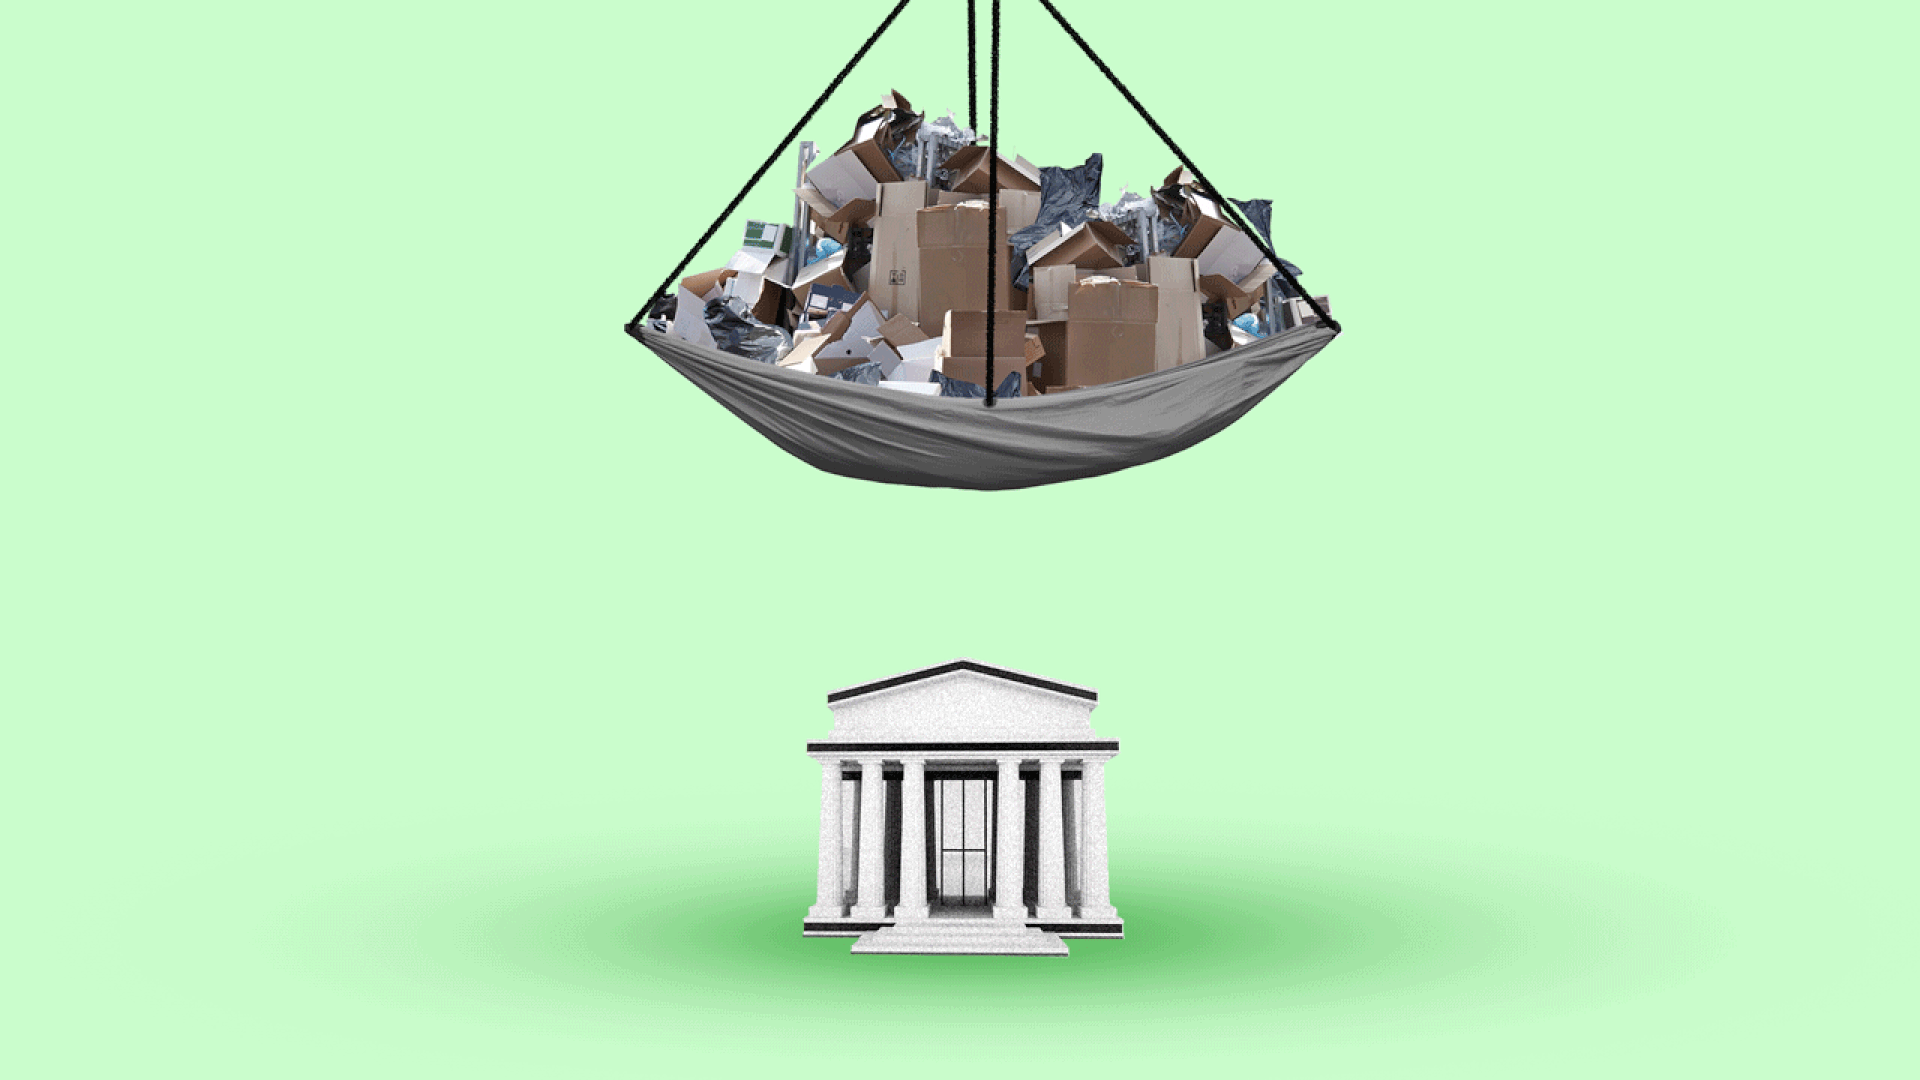 Illustration of a pile of junk swinging back and forth over a bank.